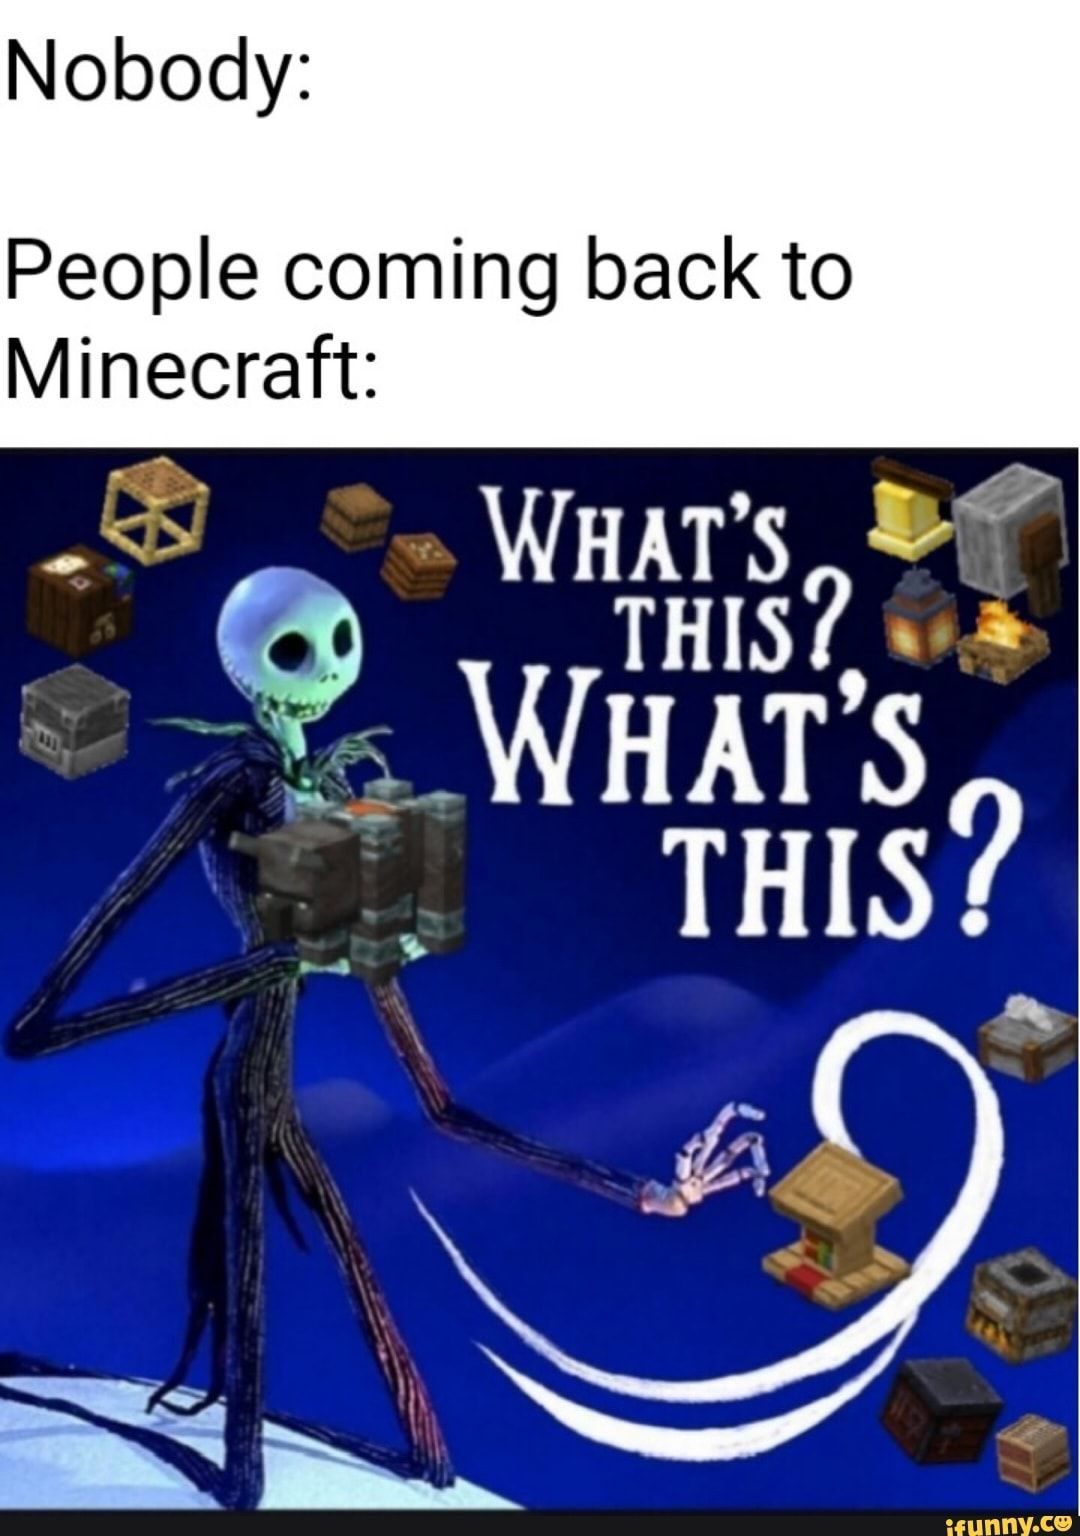 Minecraft Meme About Returning After All The Updates